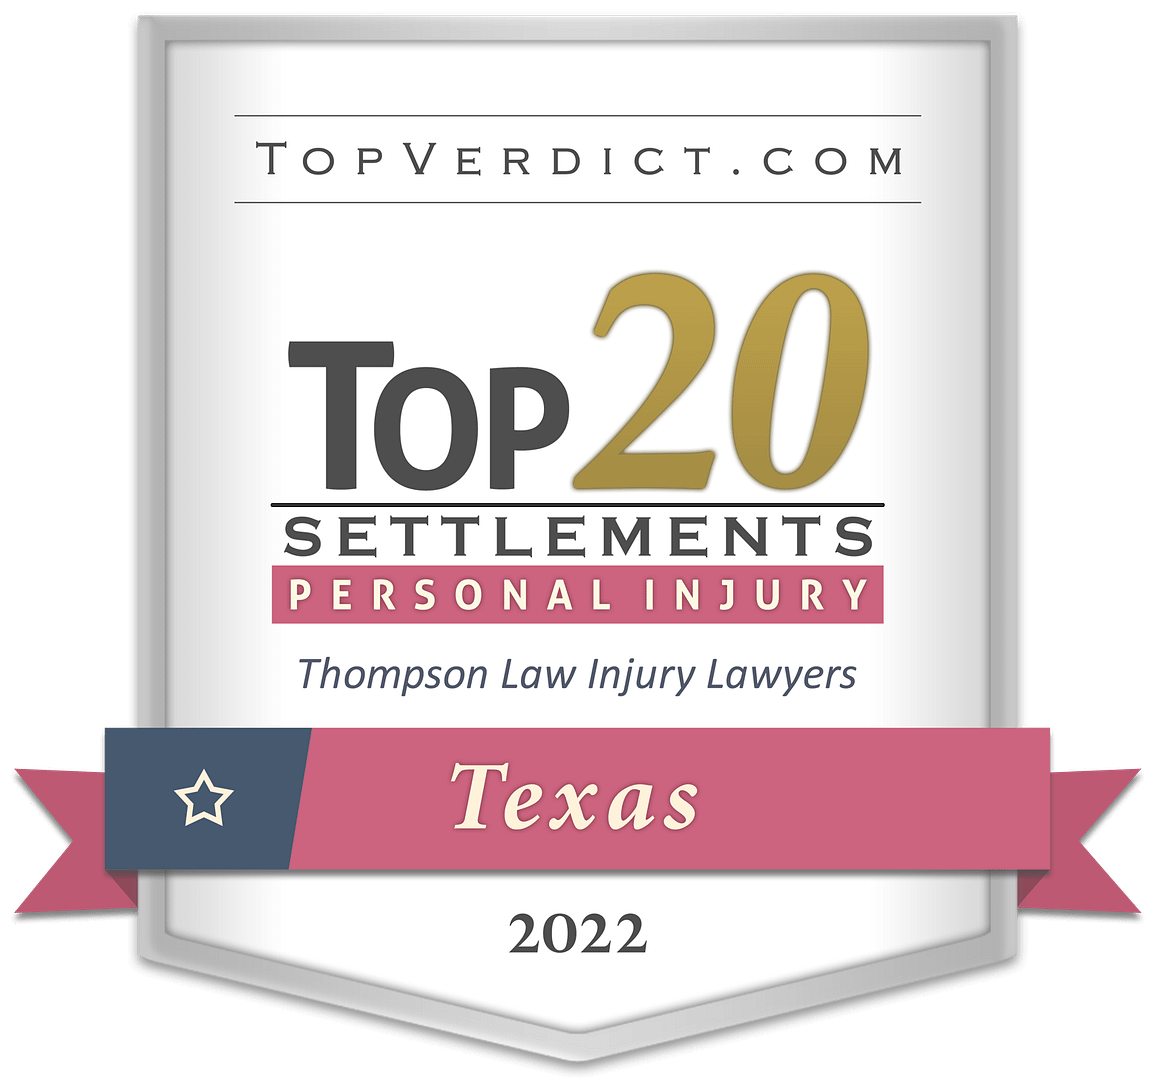 TopVerdict Top 20 personal injury settlements in Texas 2022 badge - Texas Wrongful Death Law Firm